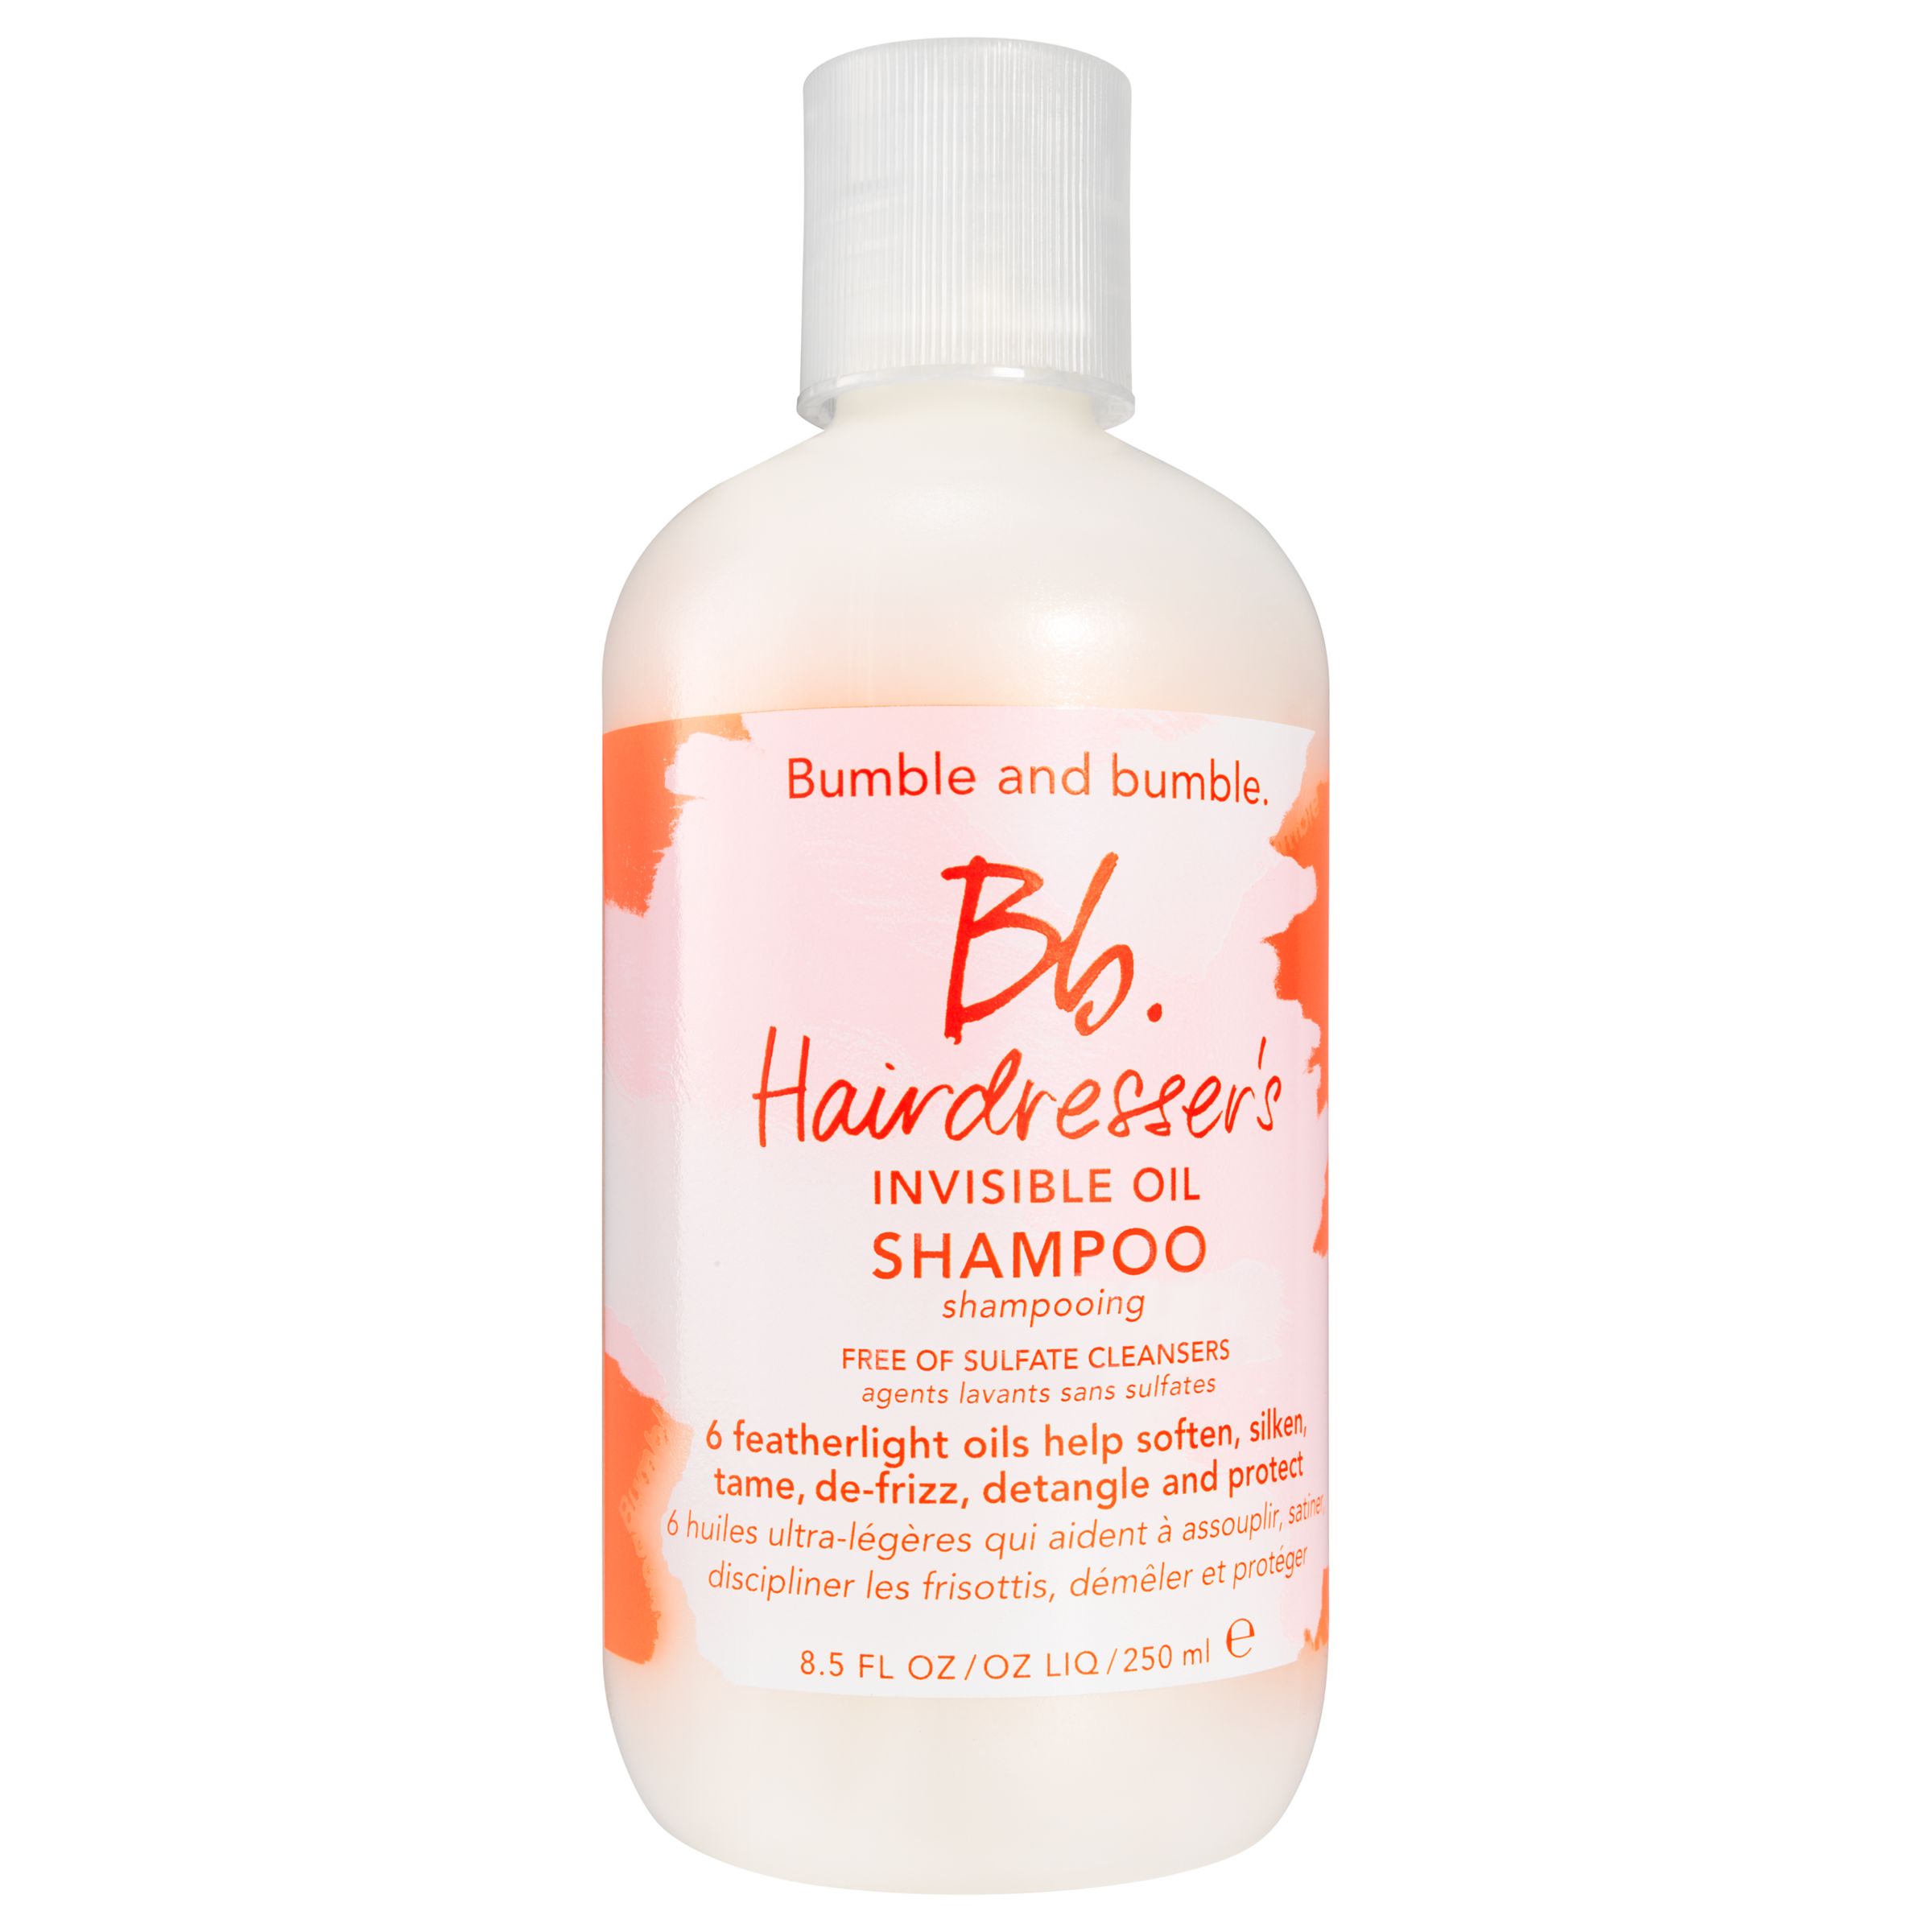 Bumble and bumble Hairdressers Invisible Oil Shampoo, 250ml 1